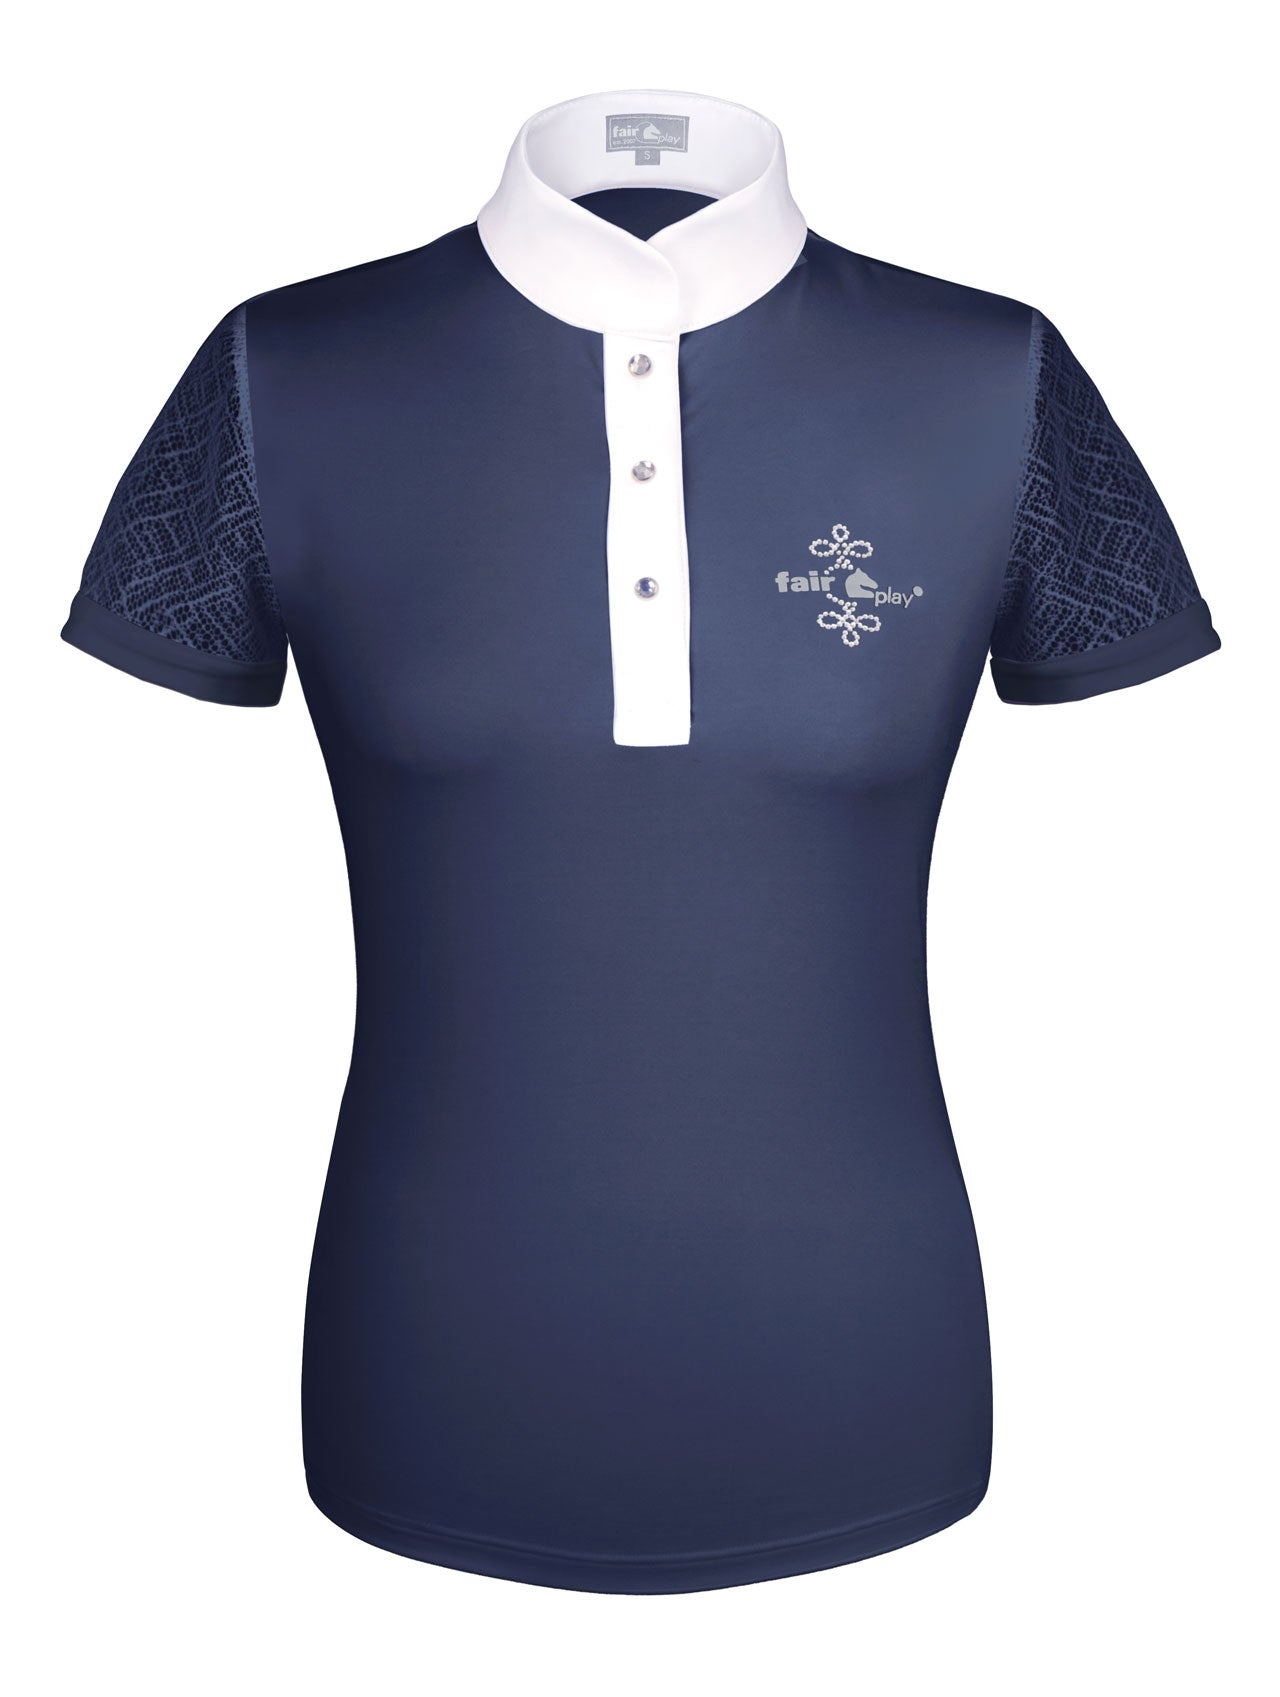 Navy white competition shirt by fair play